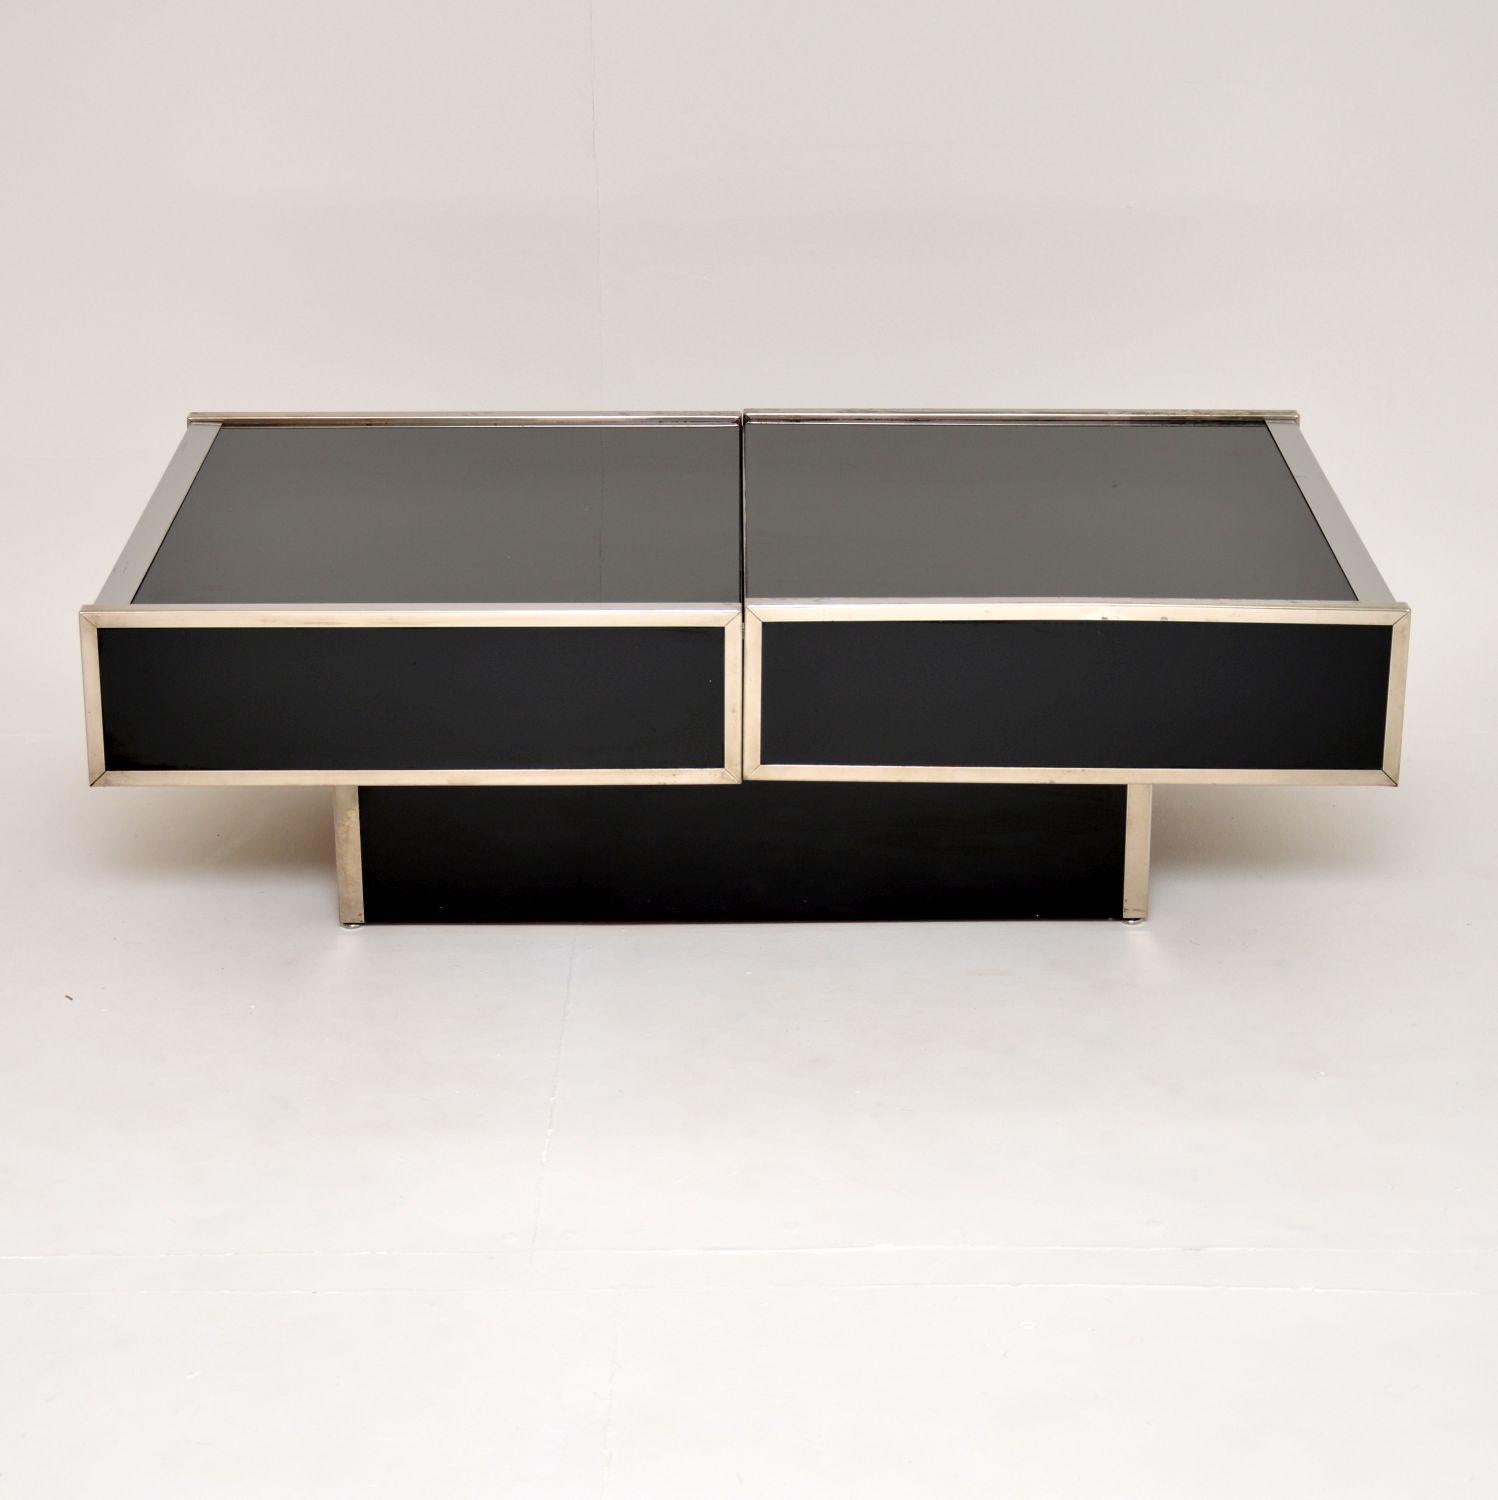 An absolutely fabulous vintage coffee table with a hidden dry bar compartment. This was made in Italy around the 1970’s, it was possibly designed by or is in the manner of Willy Rizzo.

It’s very well made with a black glass top, black formica